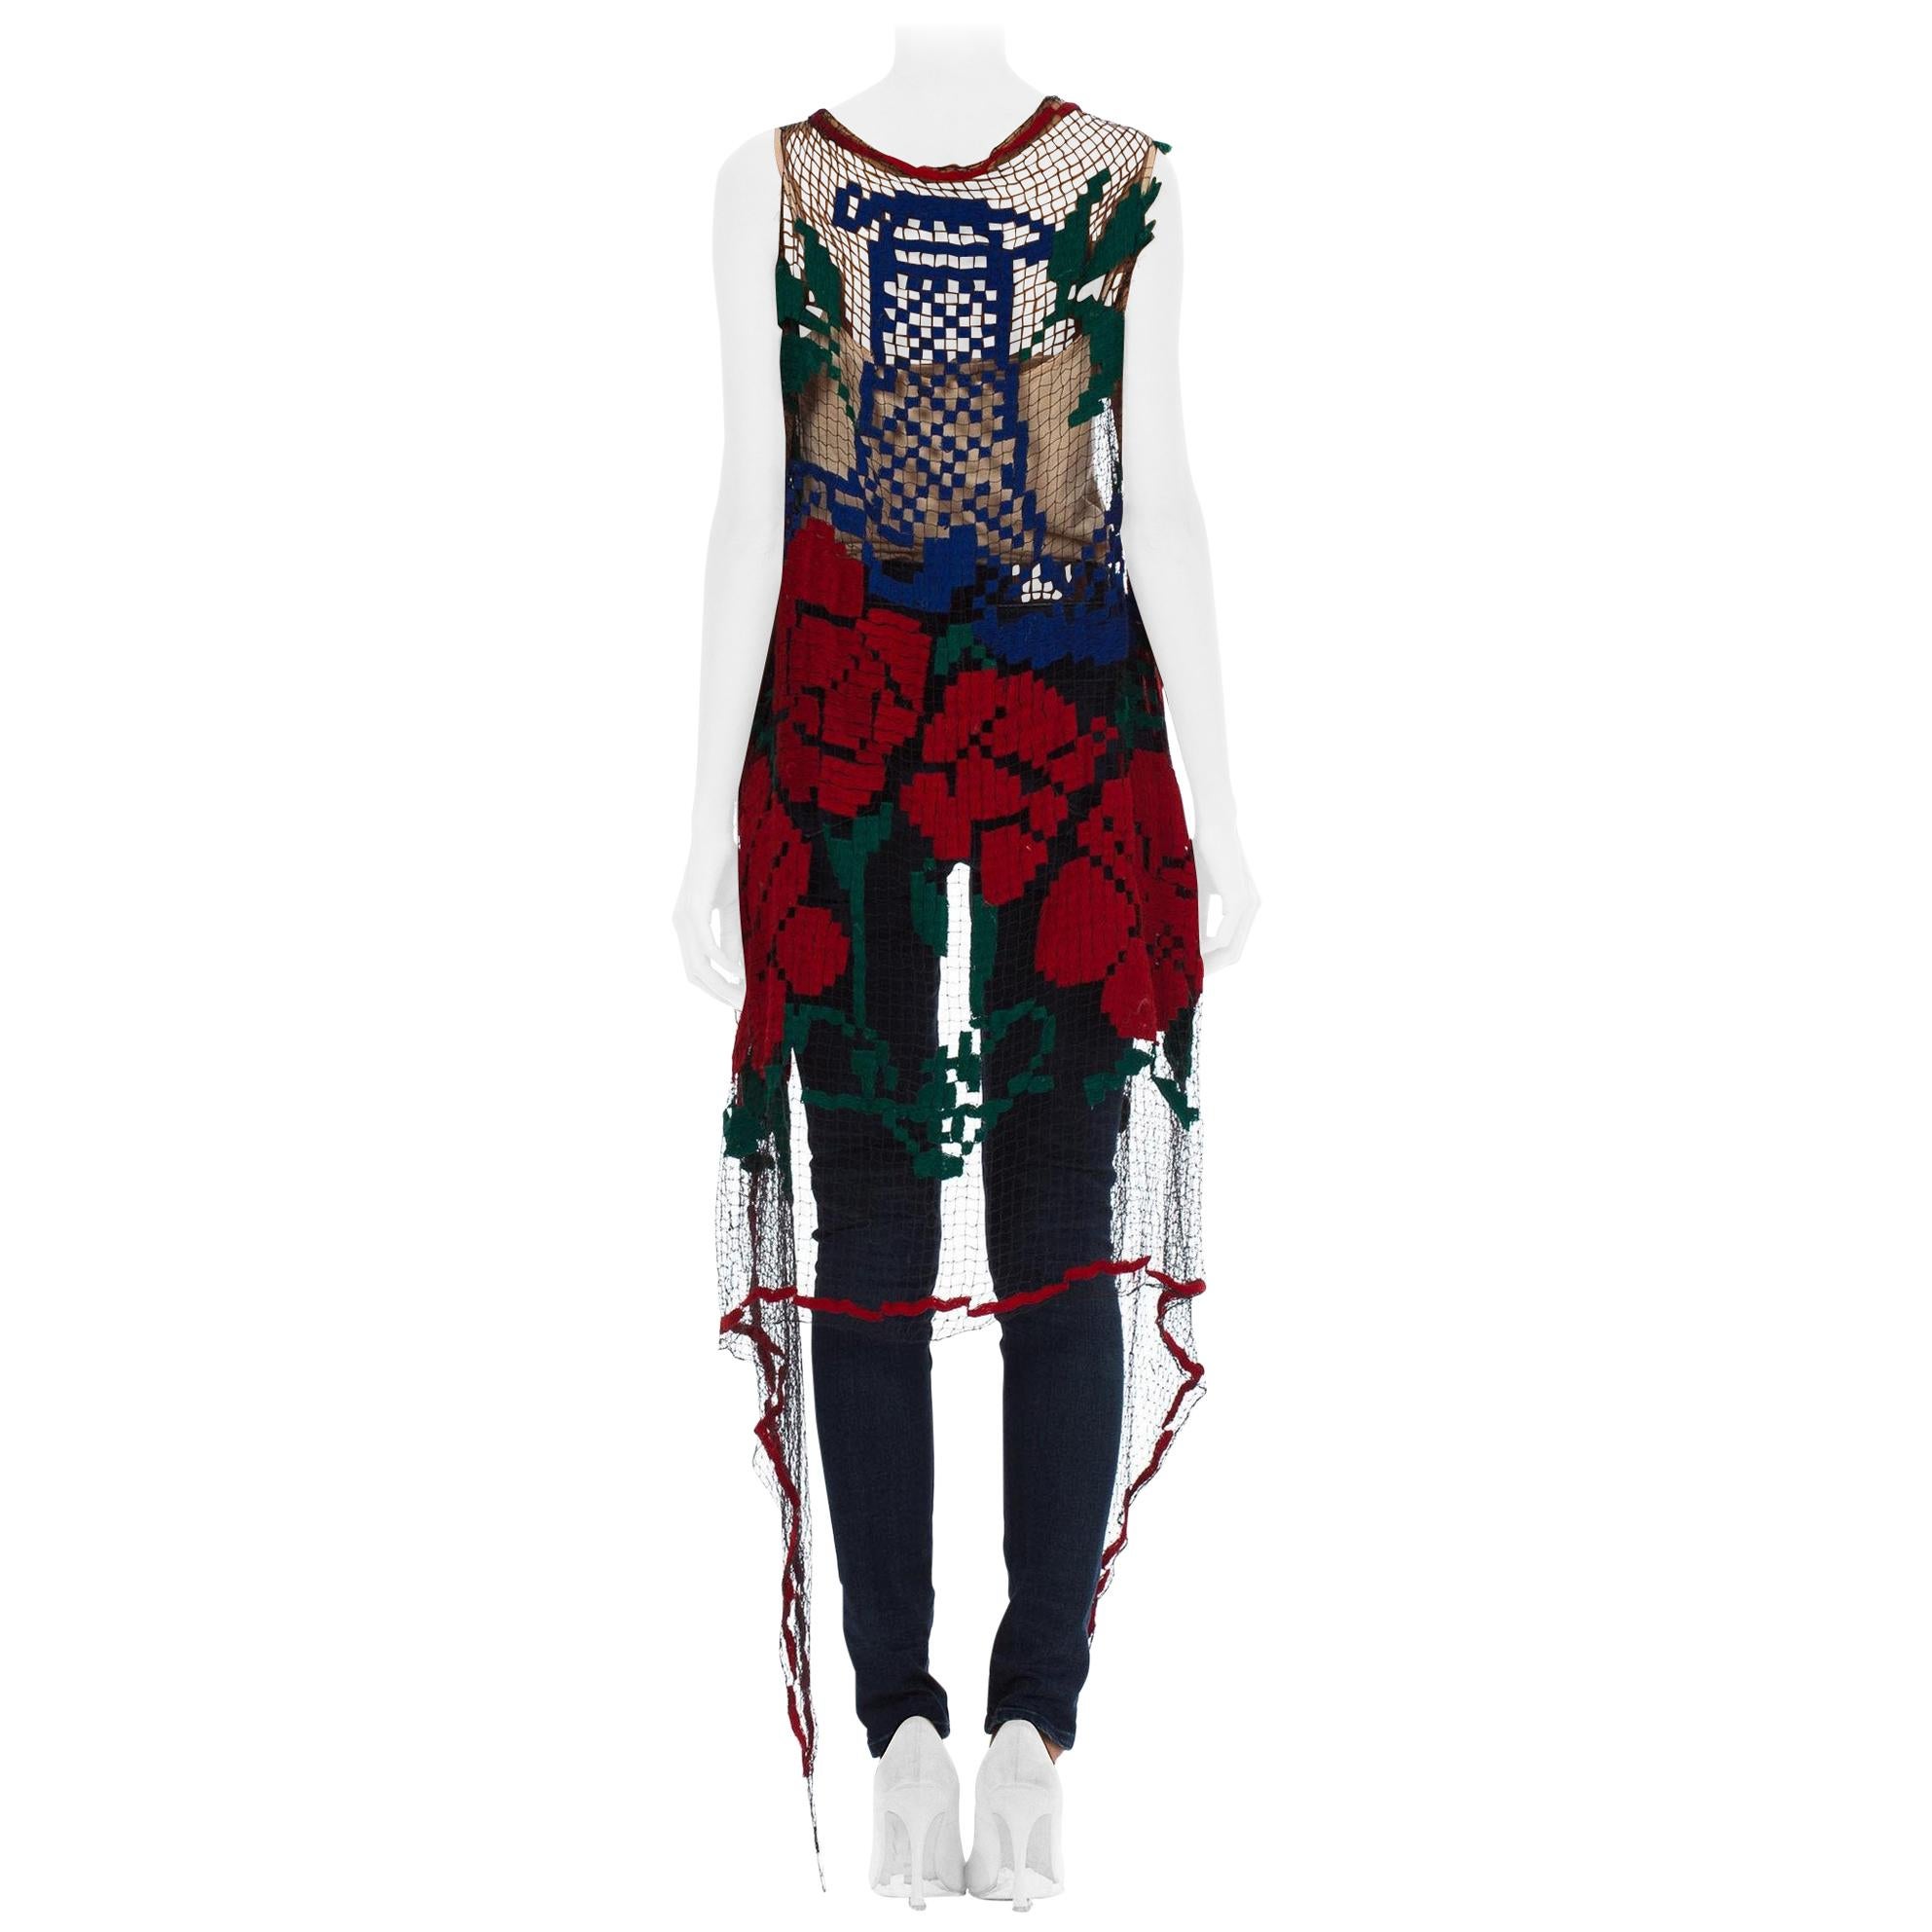 MORPHEW COLLECTION Multicolor Embroidered Net Lace Boho Vest